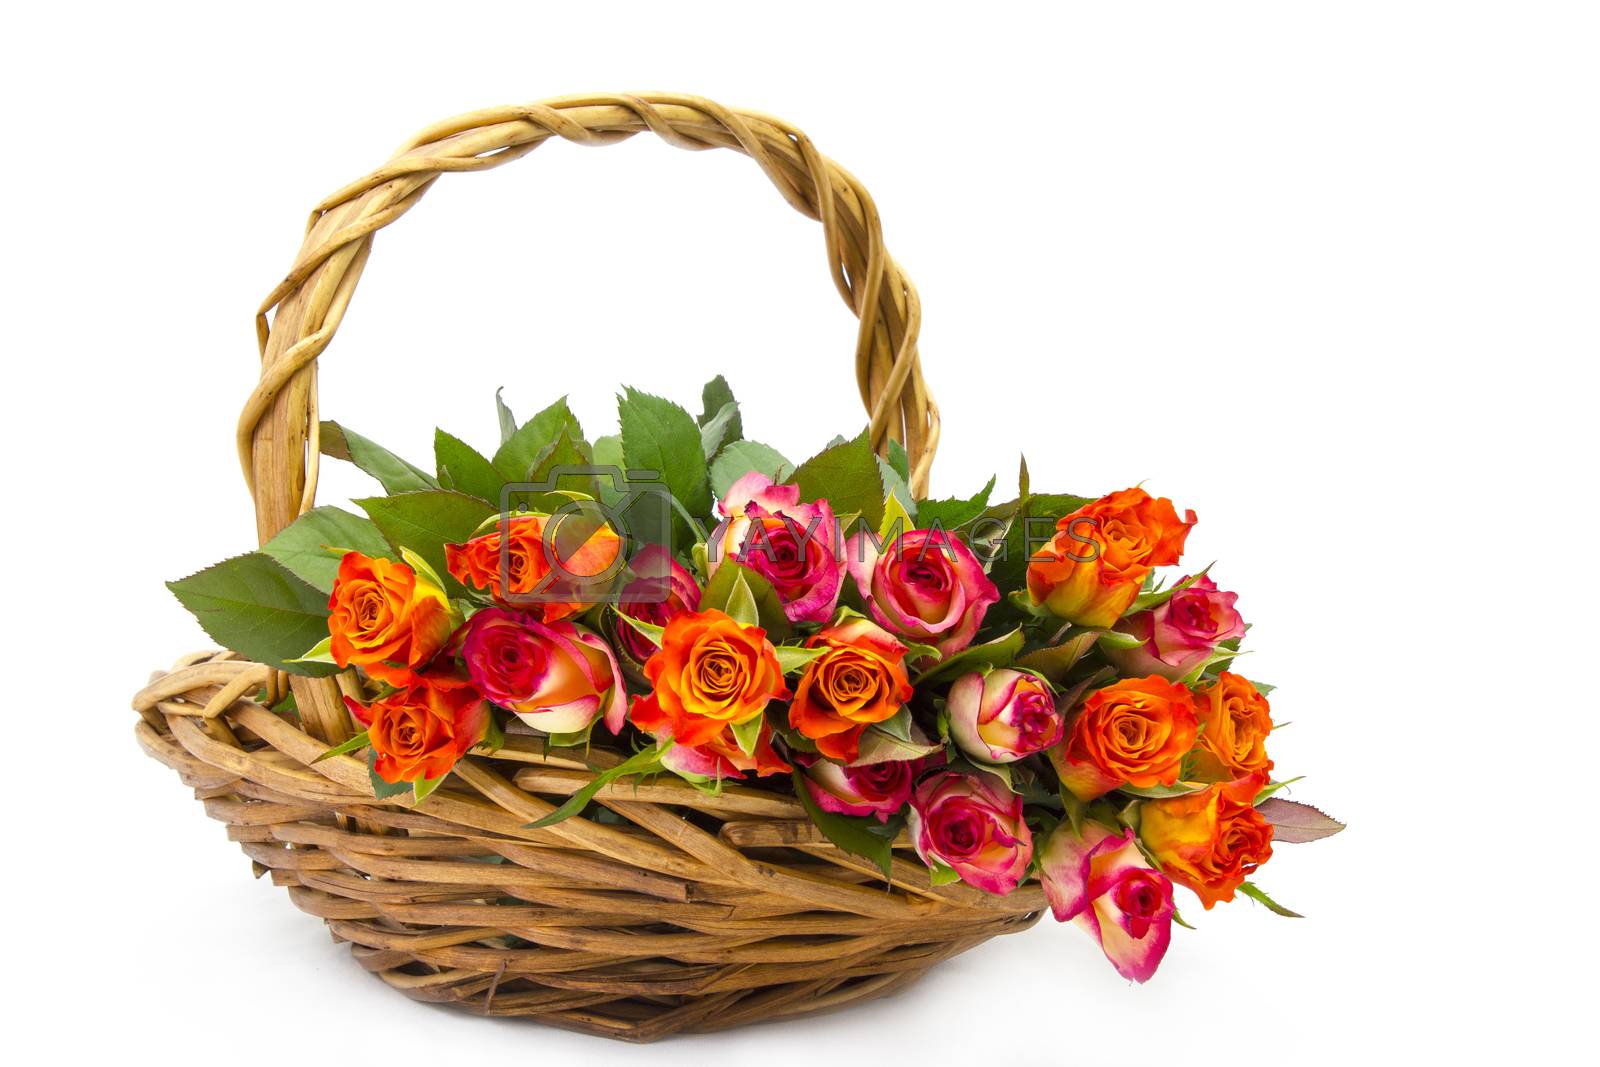 Royalty free image of roses in a basket on white background by miradrozdowski